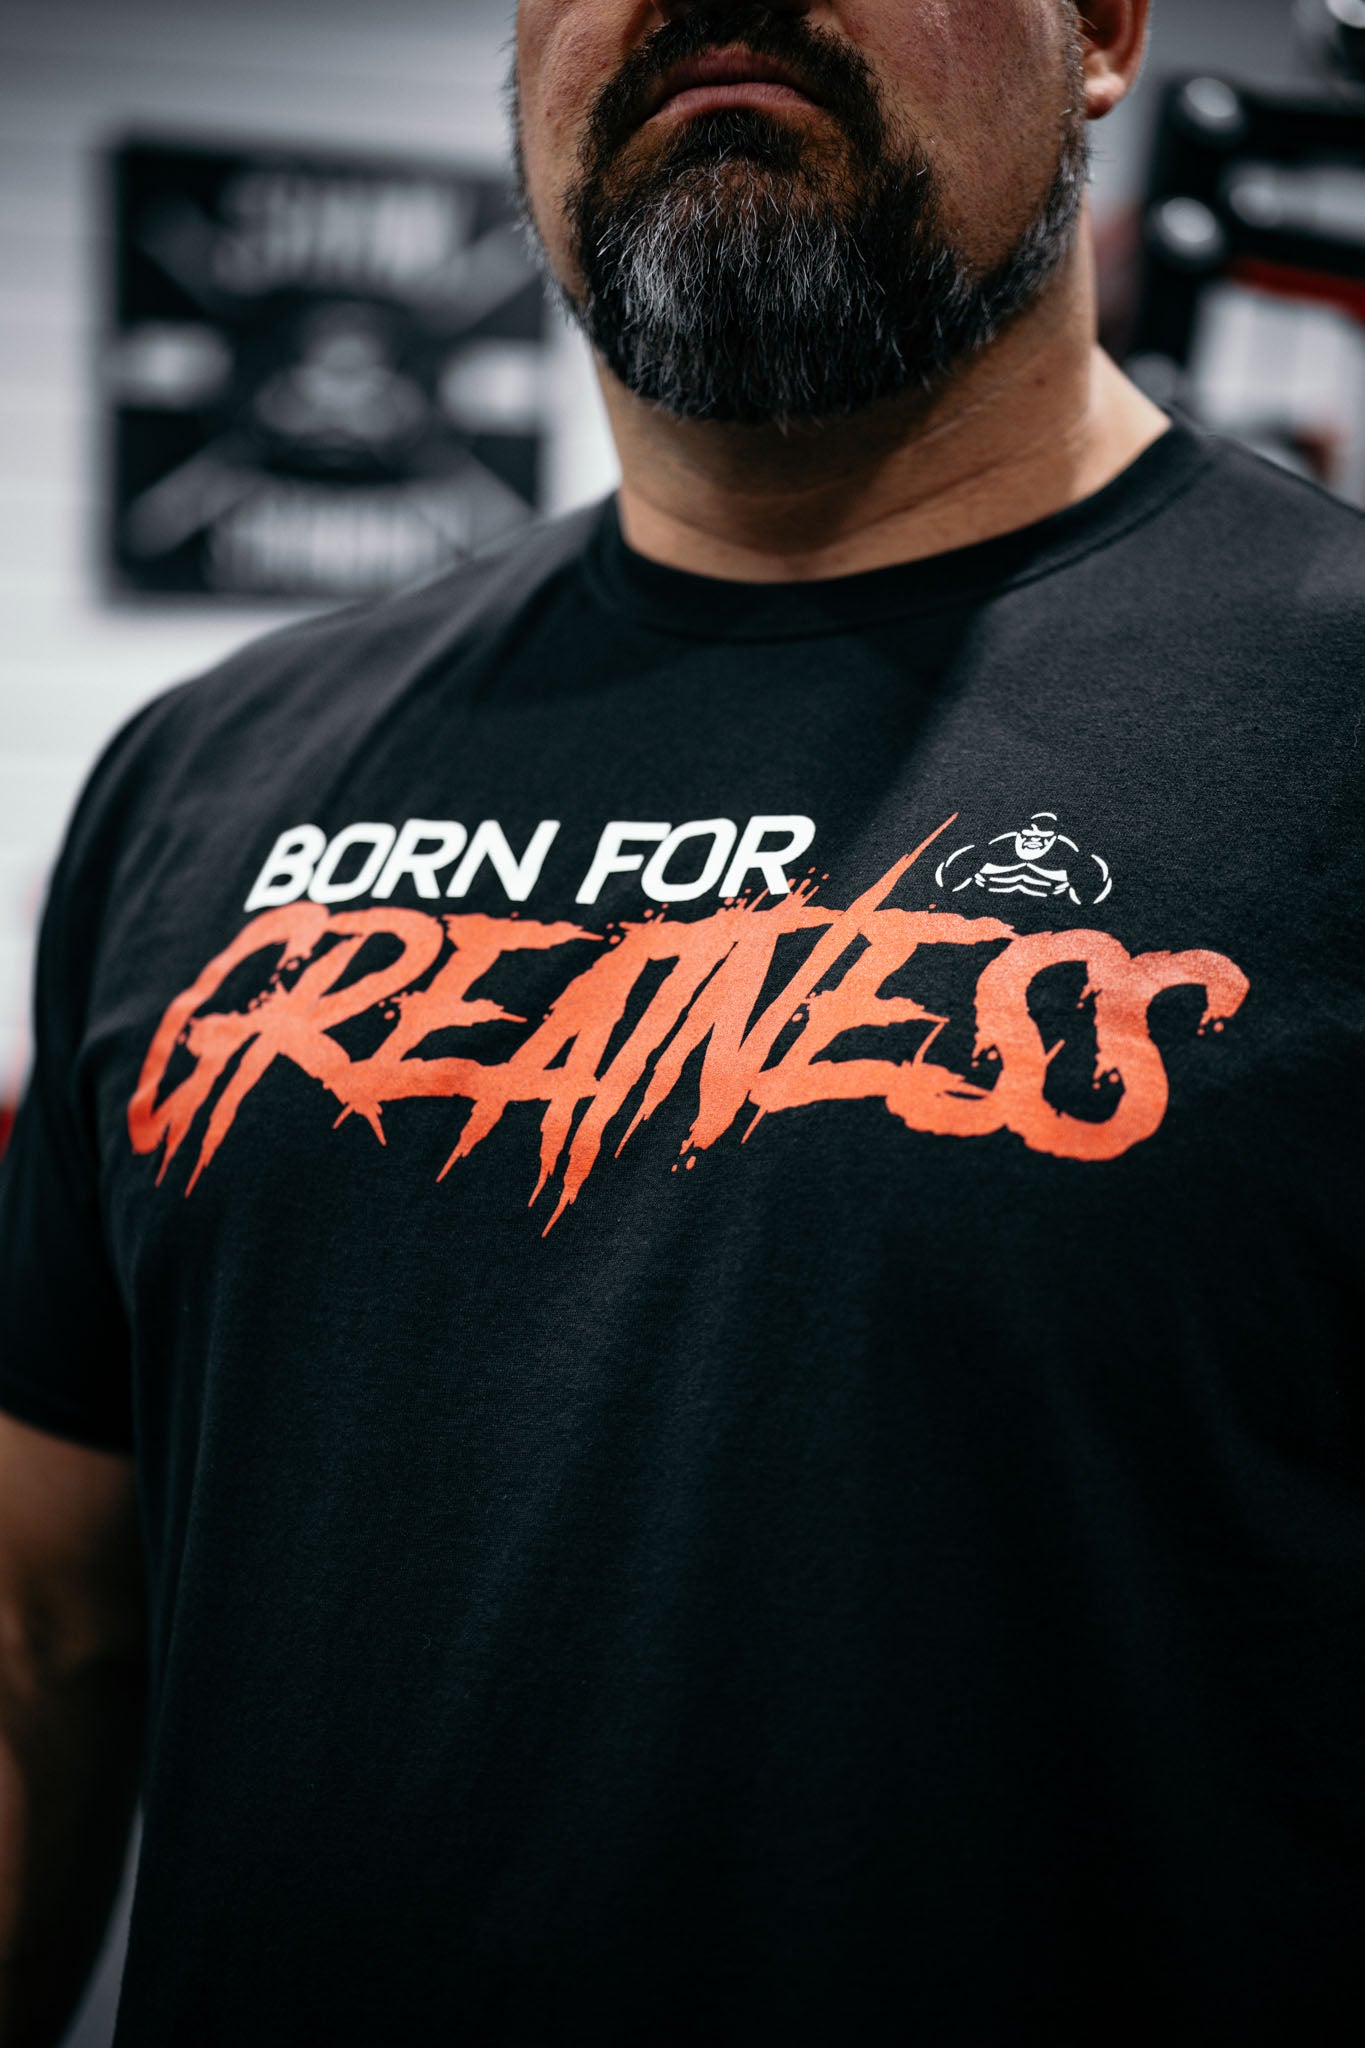 BORN FOR GREATNESS